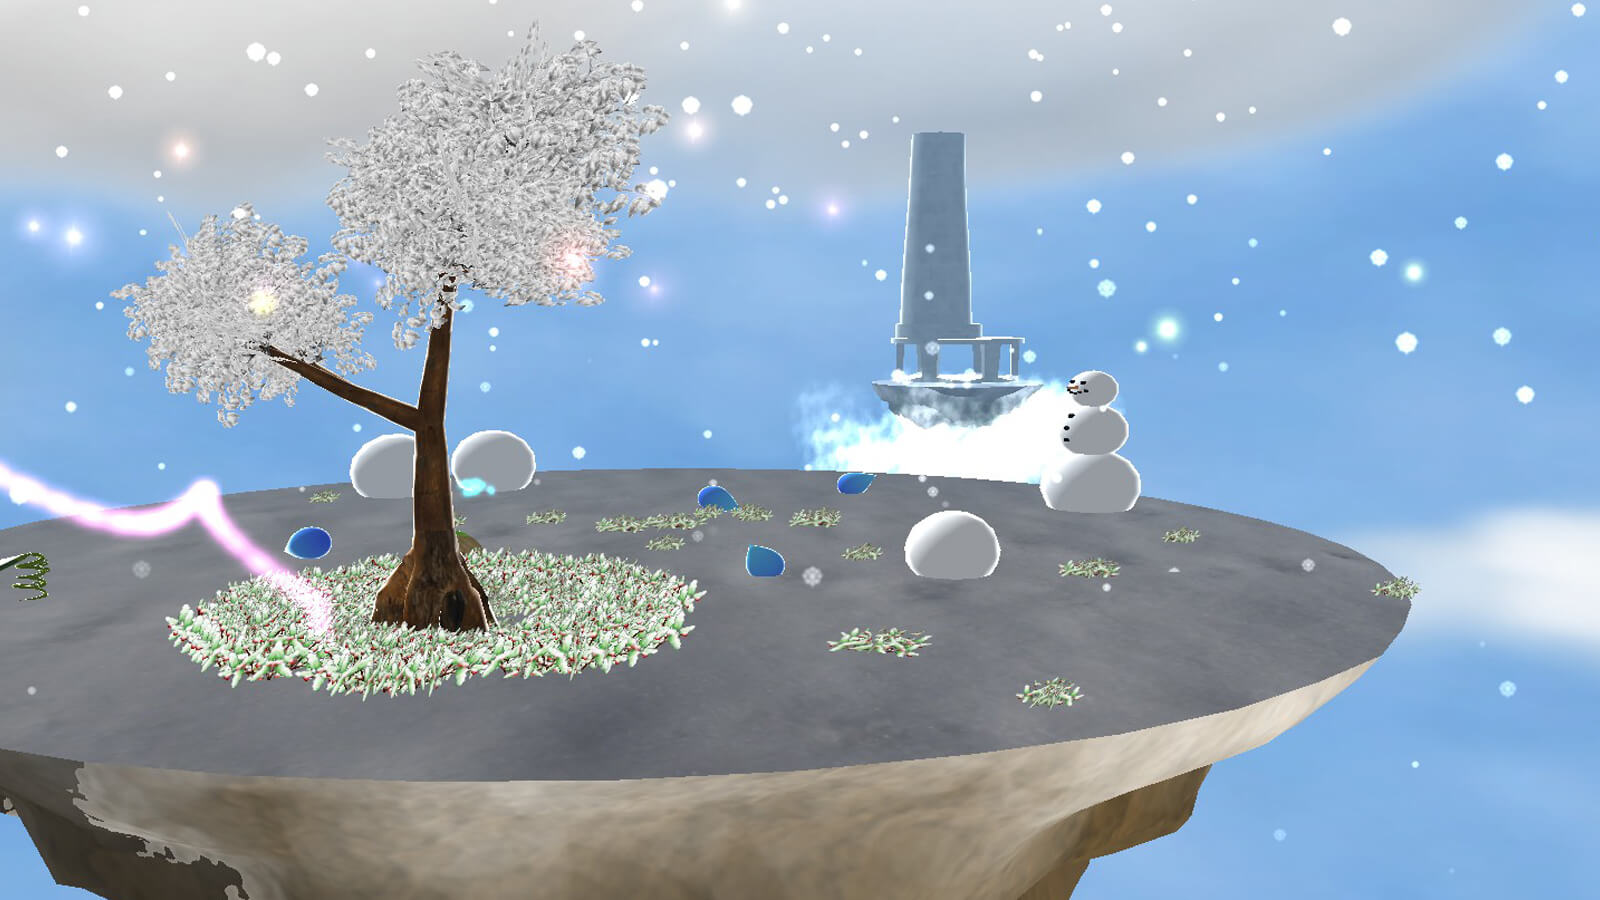 A floating island covered in snow, with a tree and a snowman.